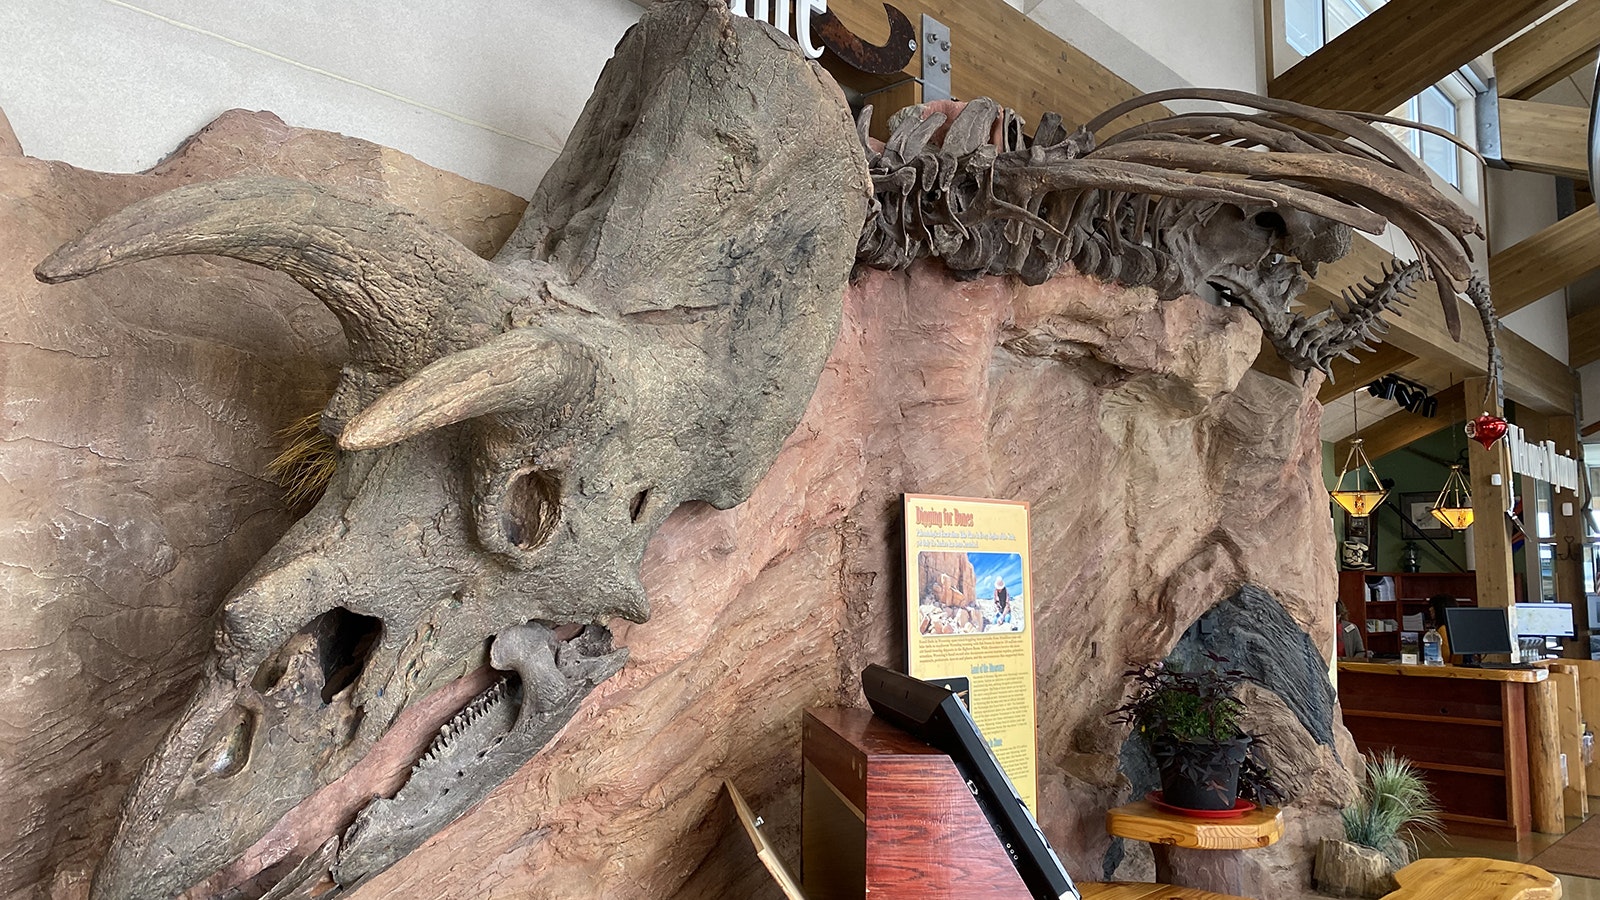 A replica of the Triceratops specimen "Kelcie" in the Northeast Wyoming Welcome Center. The actual specimen, found in 1998 in Niobrara County, is in the Children's Museum of Indianapolis in Indiana.